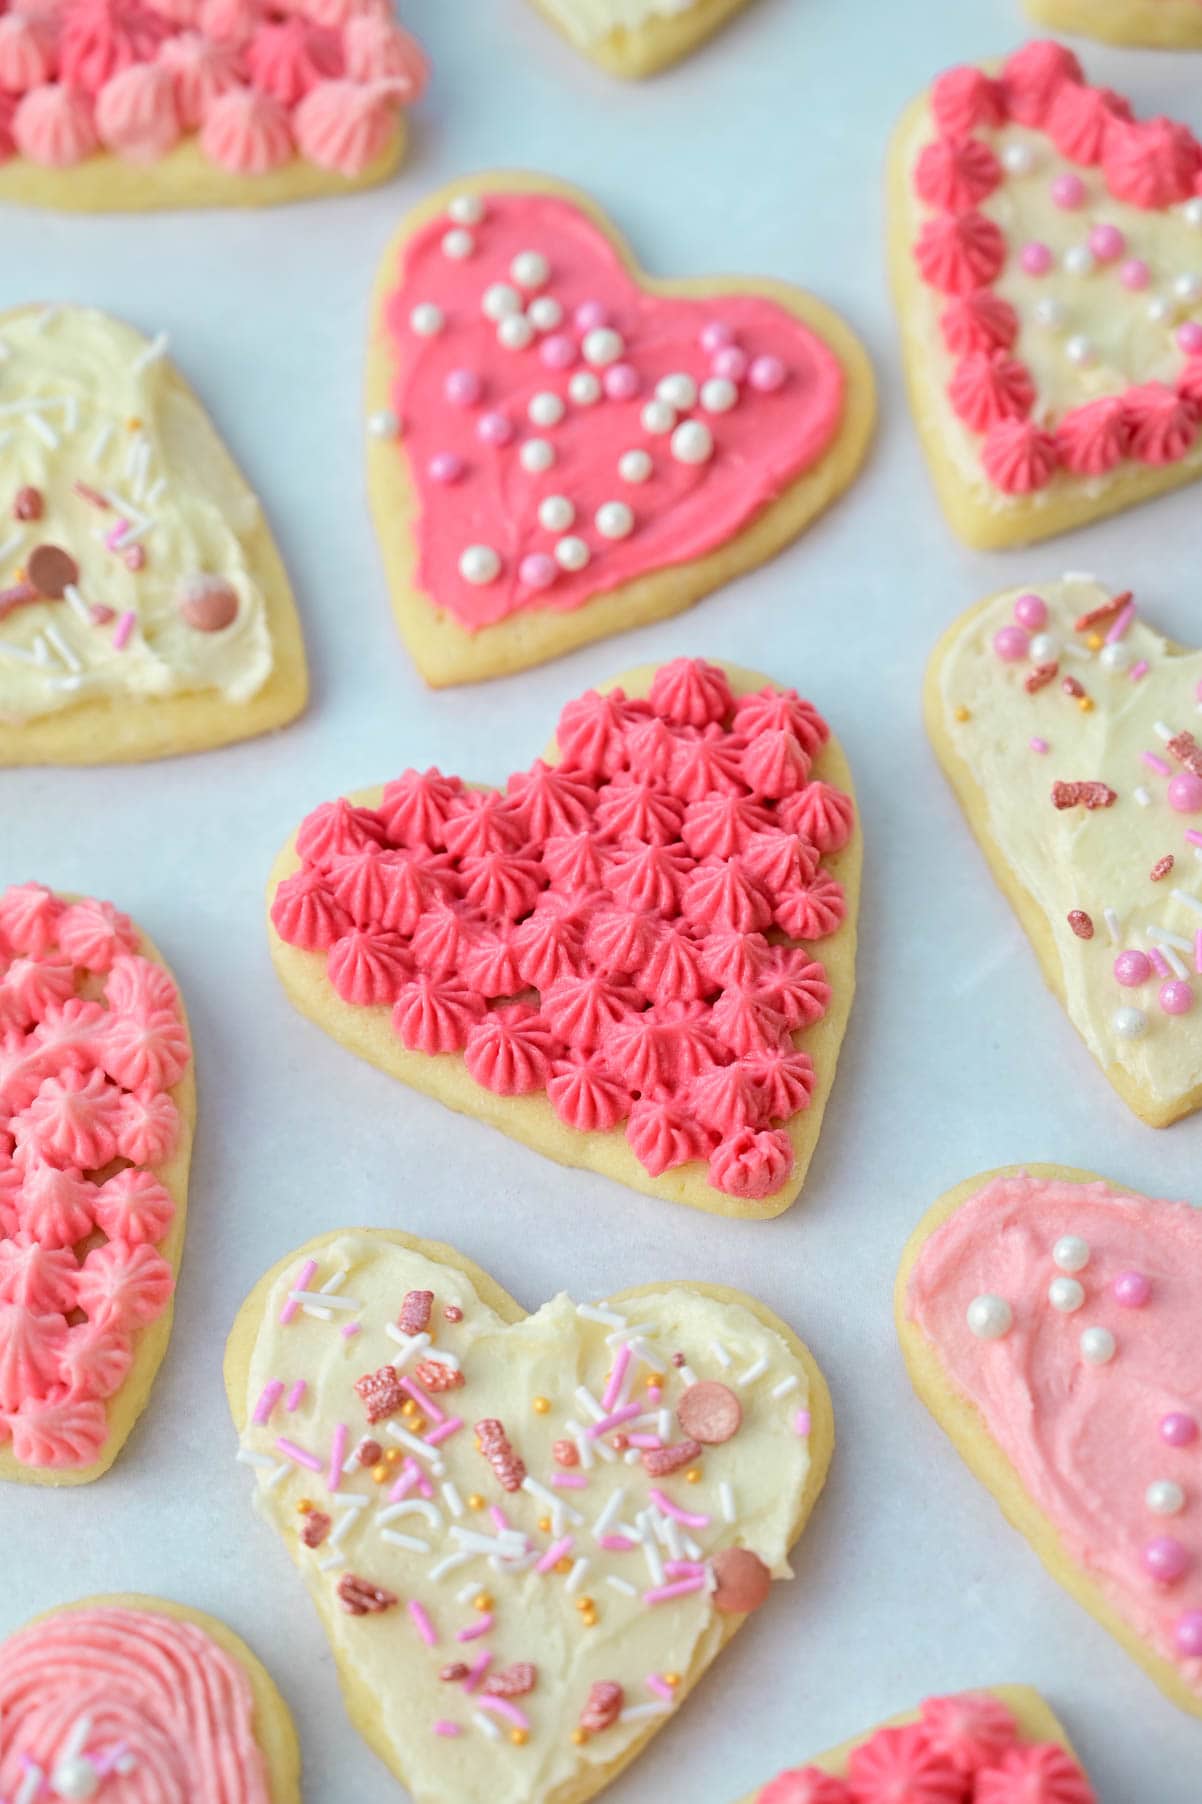 Heart-shaped Valentine's day cookies on a light blue/grey background.